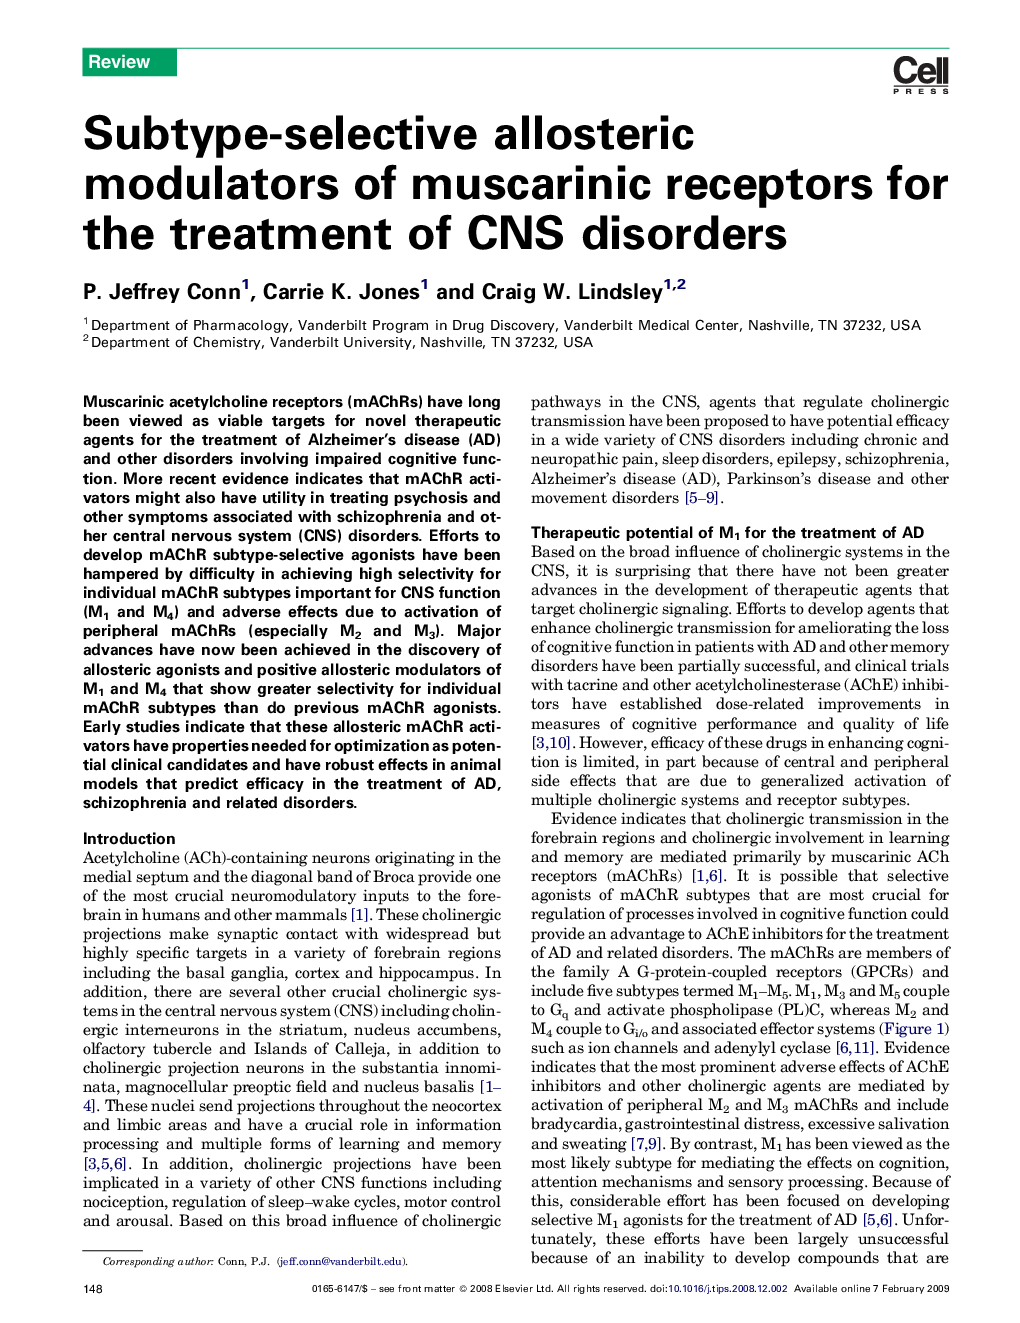 Subtype-selective allosteric modulators of muscarinic receptors for the treatment of CNS disorders